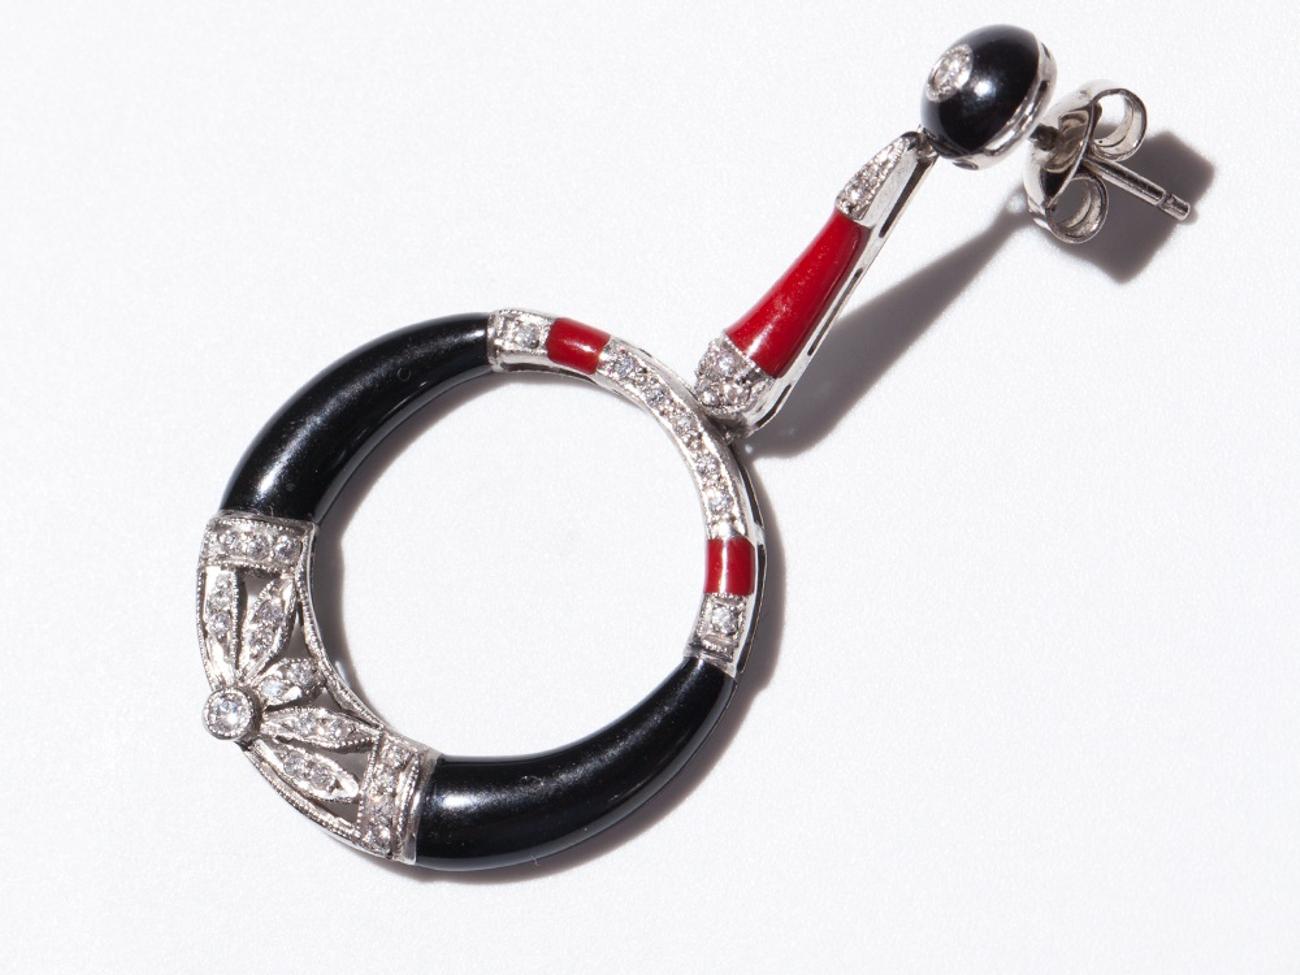 These platinum earrings with red and black enamel and diamonds are striking in their unusual design. The 66 old-mine-cut diamonds with an overall weight of approximately 0.6 carat are light and sparkling against the contrasting red and black enamel.